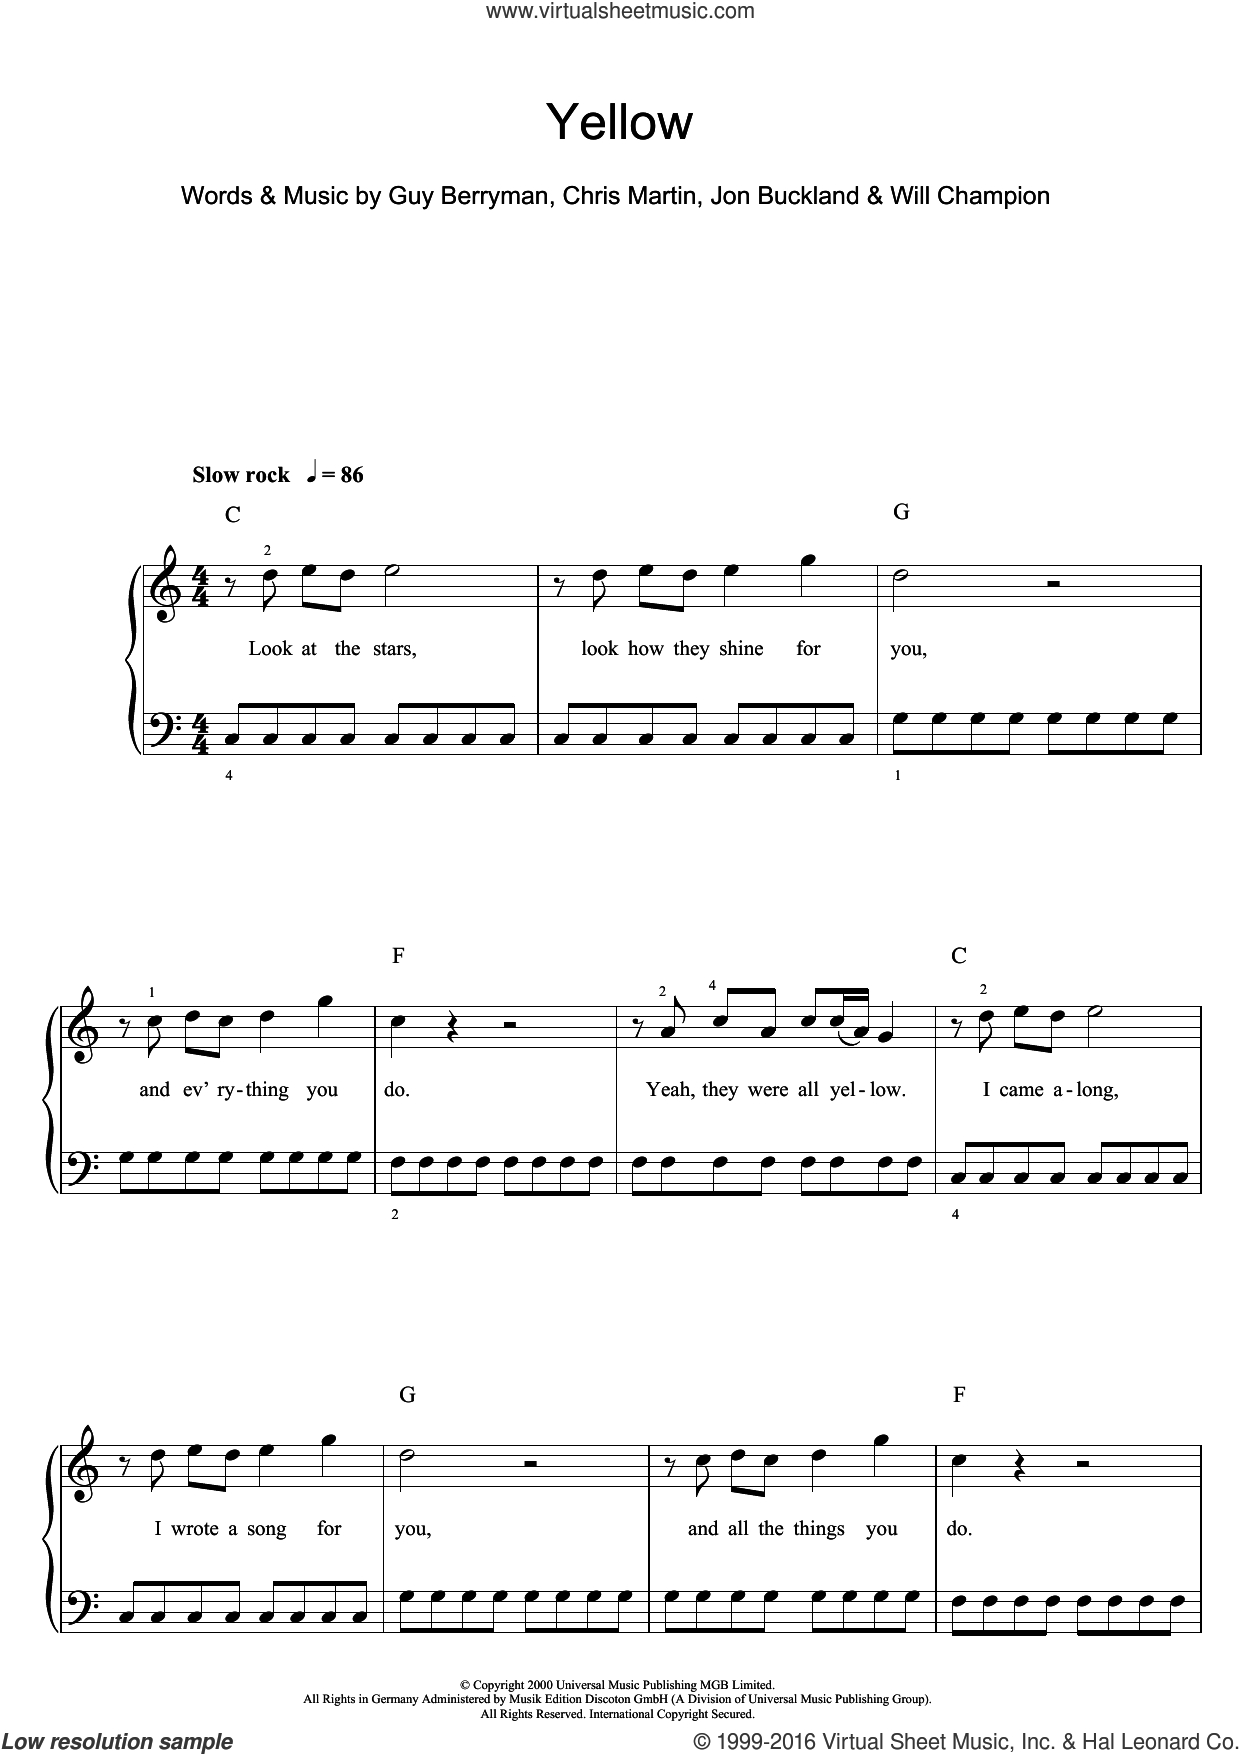 Coldplay - Yellow sheet music (beginner) for piano solo (beginners)